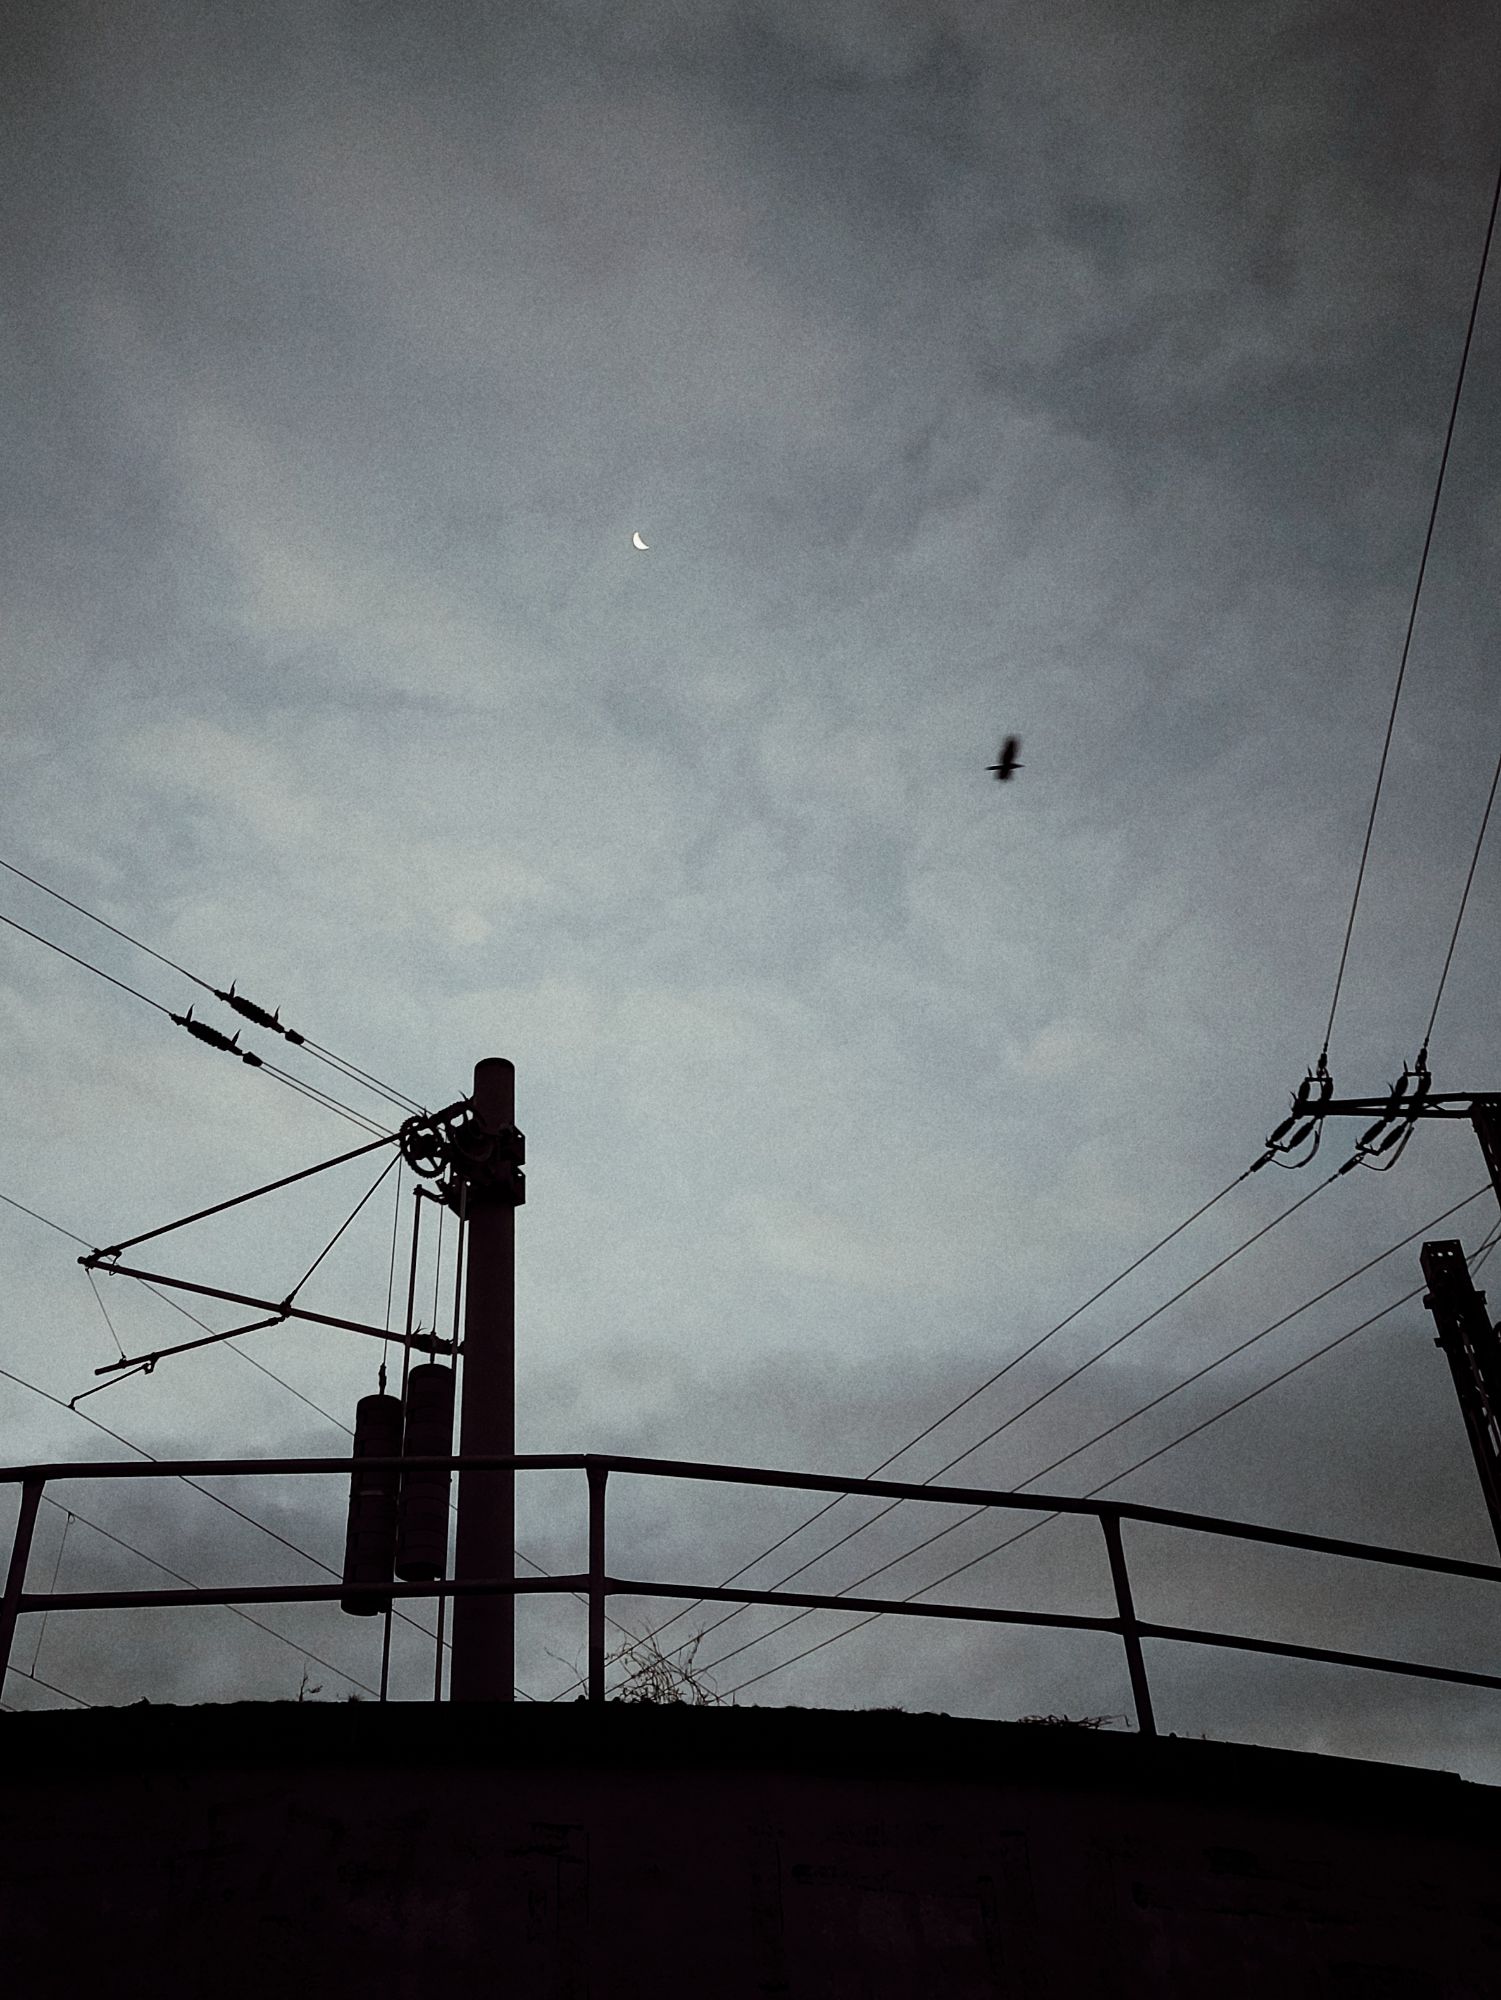 Railroad power supply, a cloudy sky above. Thin moon, and a silhouette of a bird in flight.